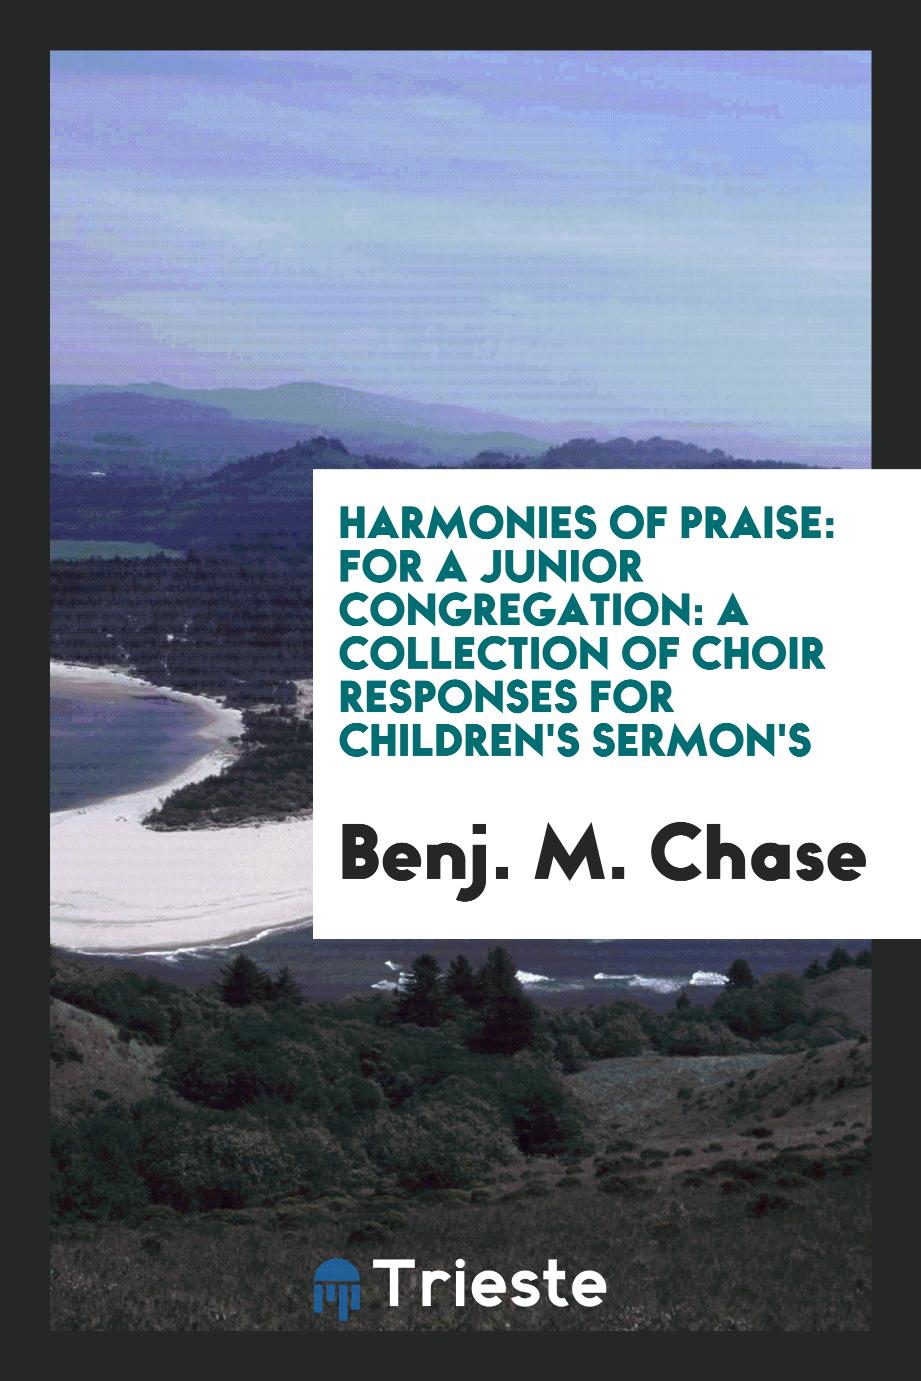 Harmonies of Praise: For a Junior Congregation: a Collection of Choir Responses for Children's Sermon's